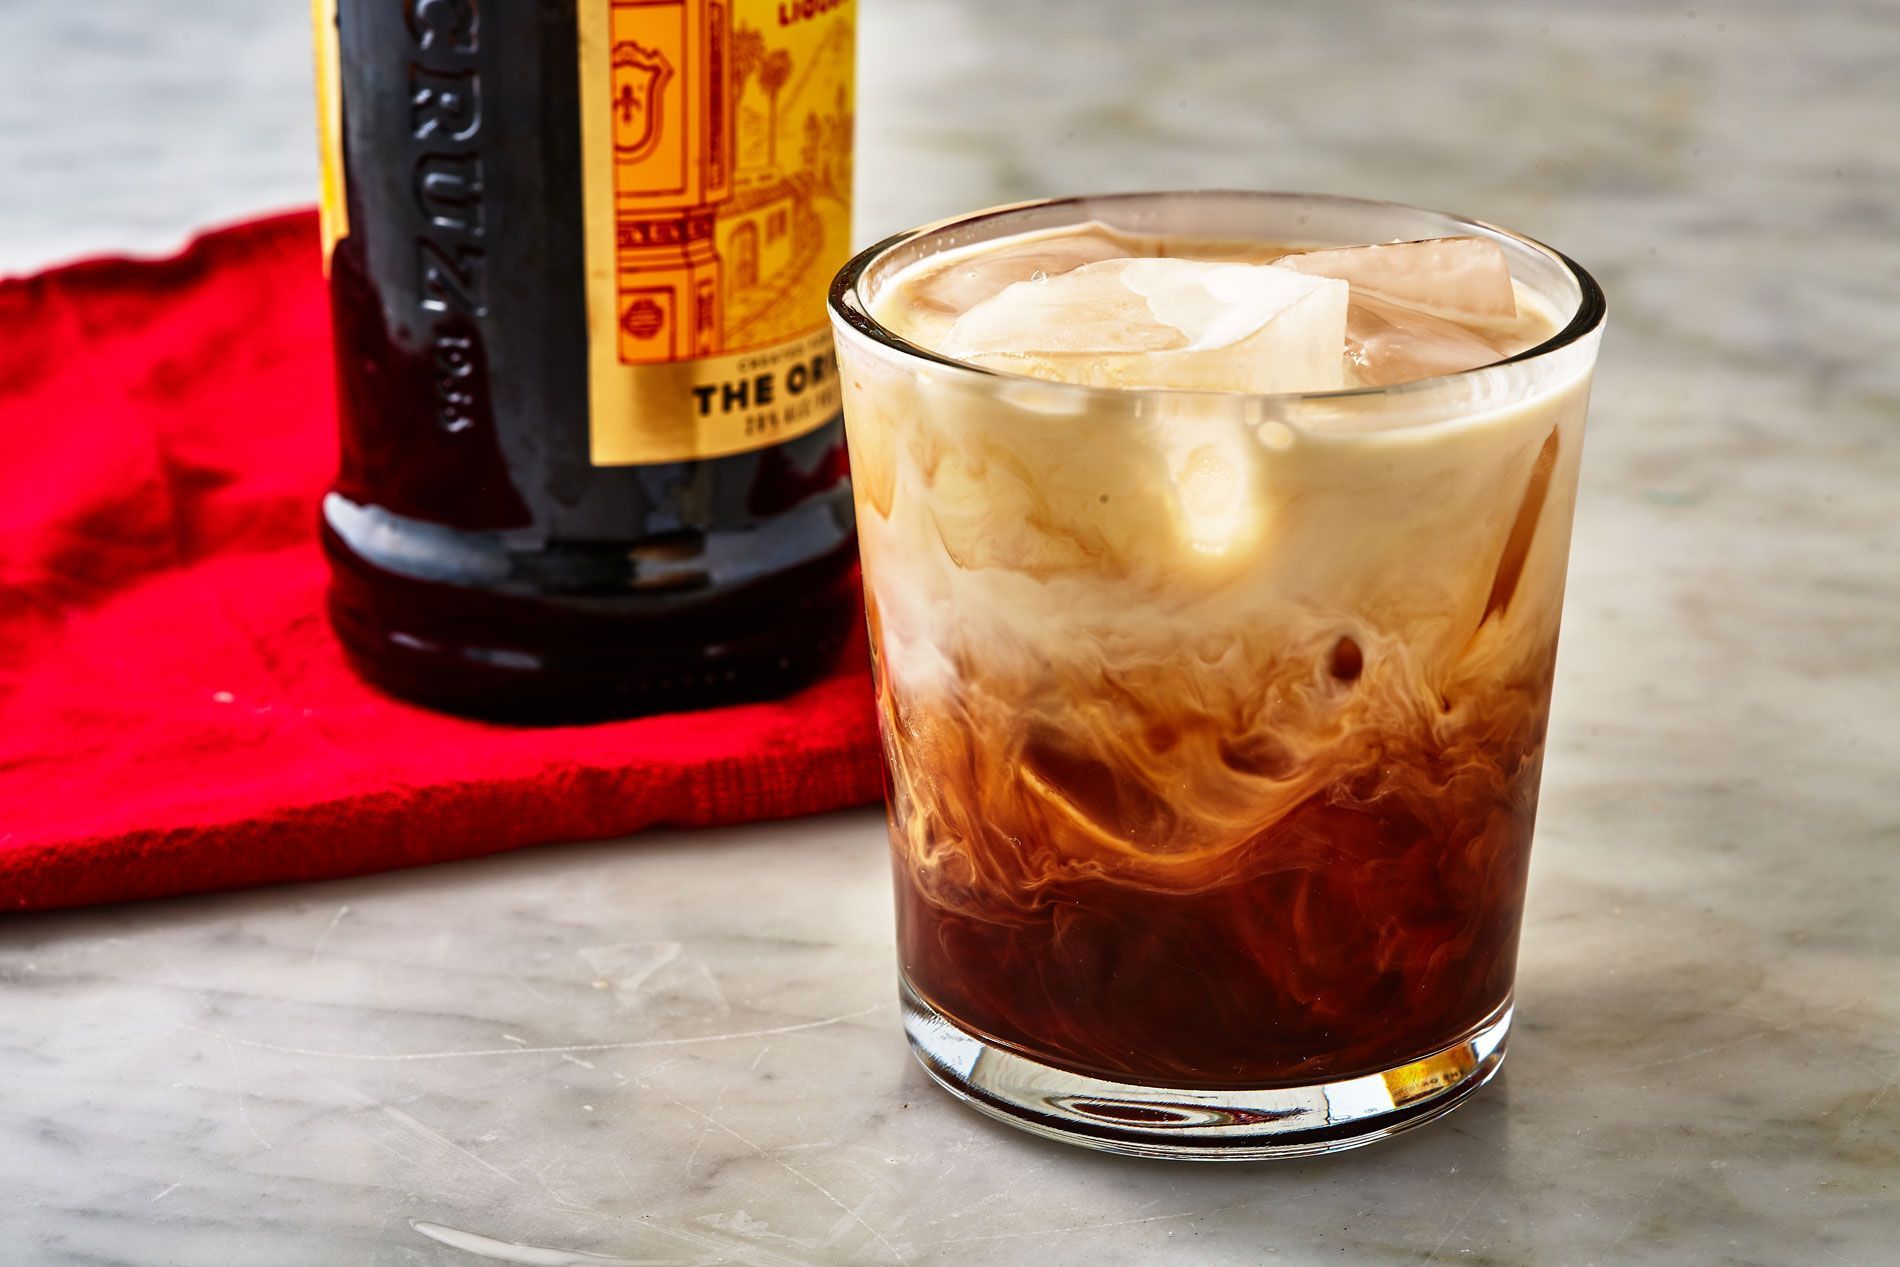 Best White Russian Recipe - How to Make White Russians